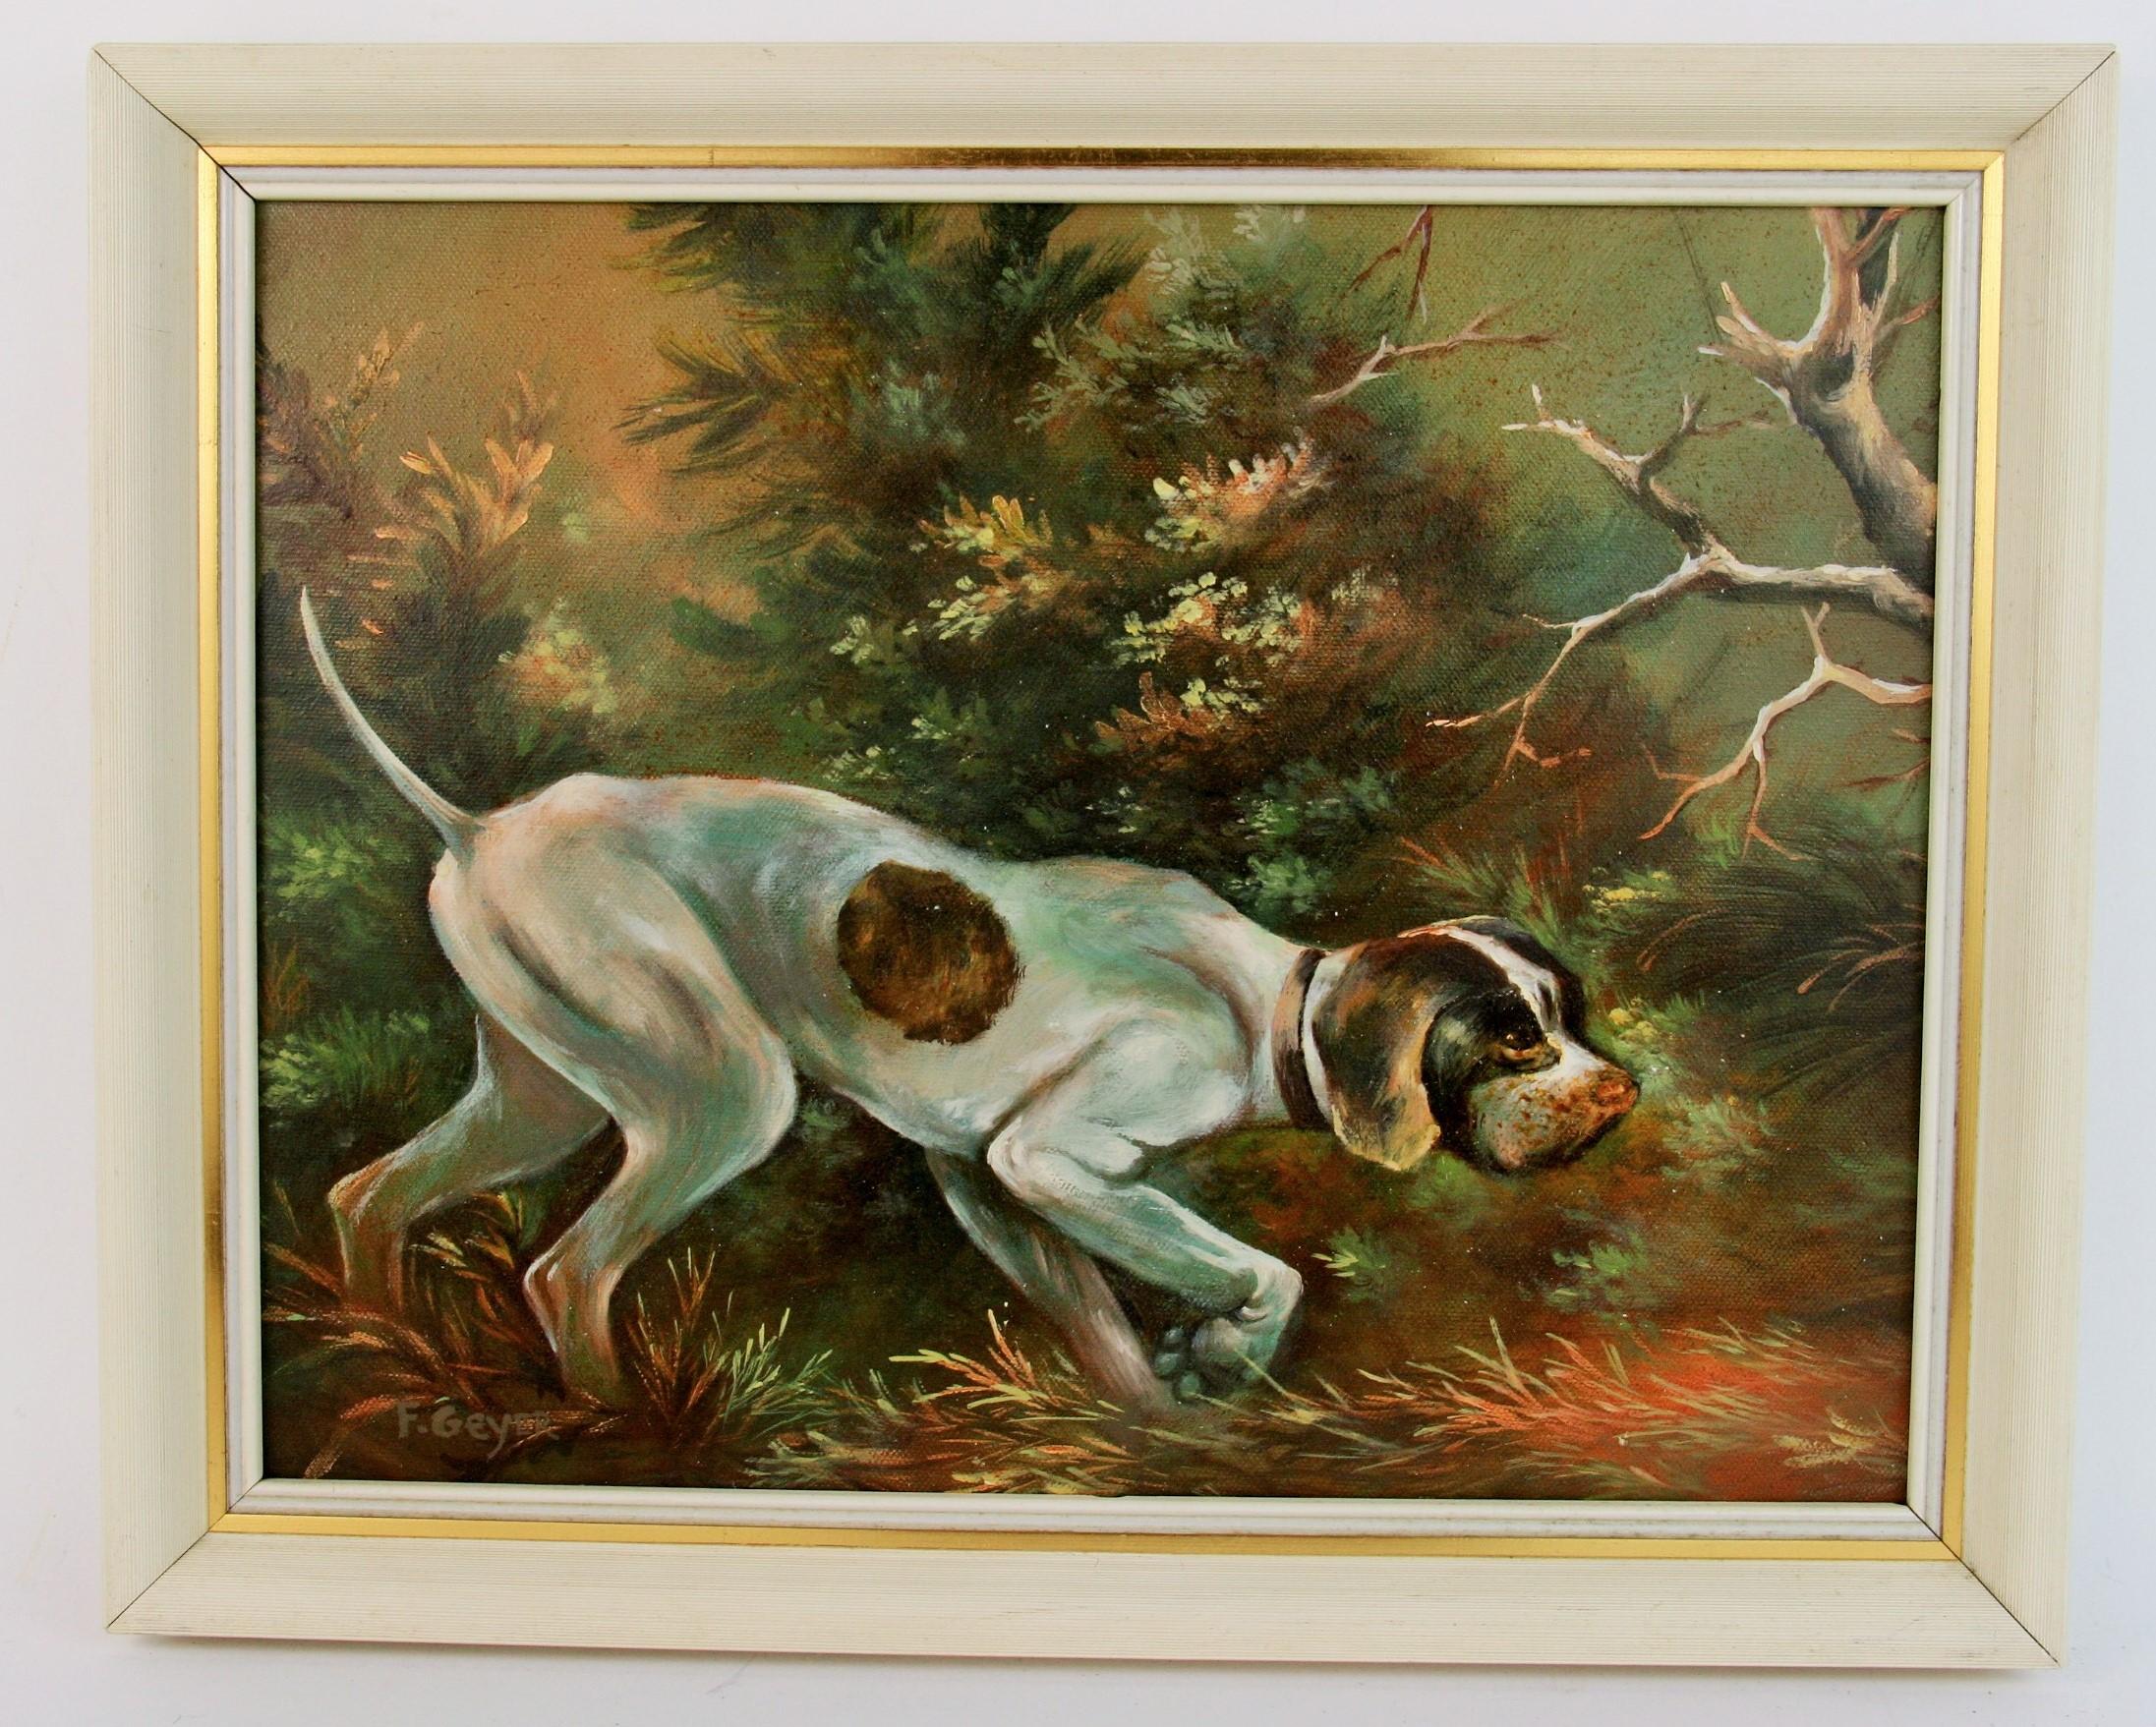 3302 Hunting dog oil on canvas applied to board displayed in a wood frame
Signed Geyer
Image size 10.25x13.5